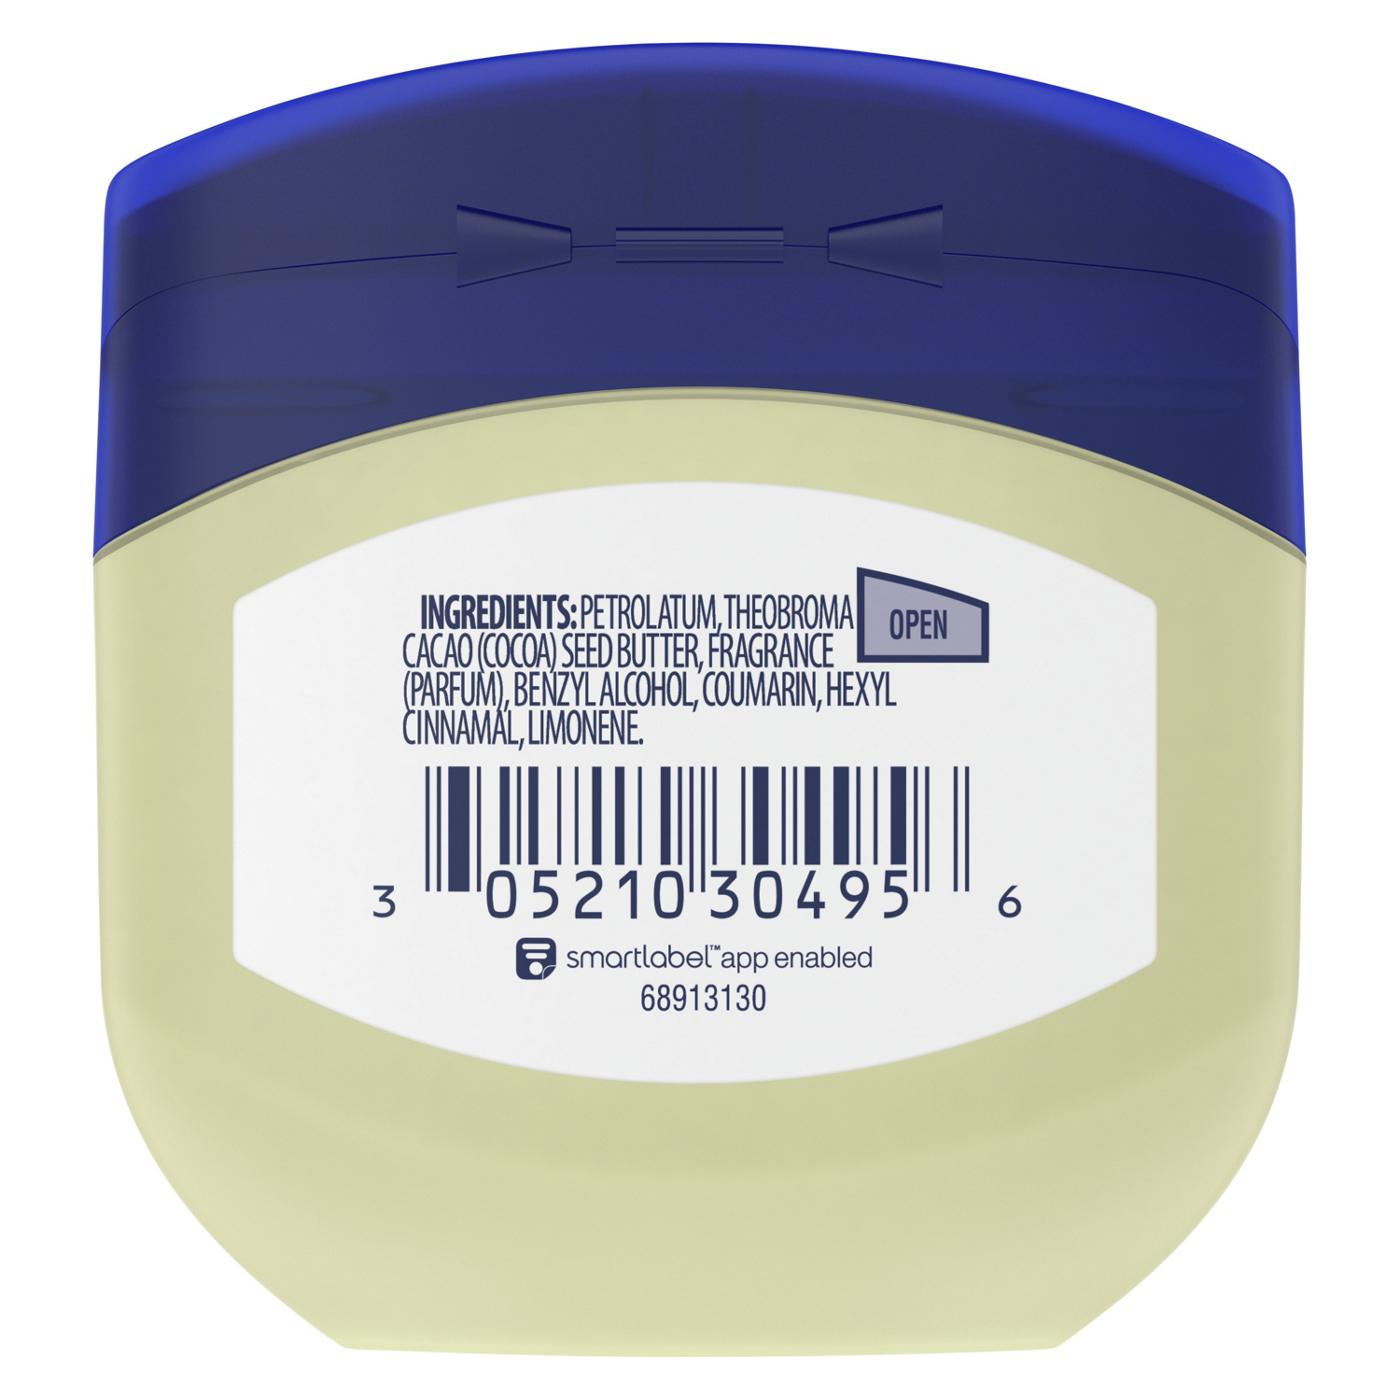 Vaseline Cocoa Butter Petroleum Jelly; image 6 of 6